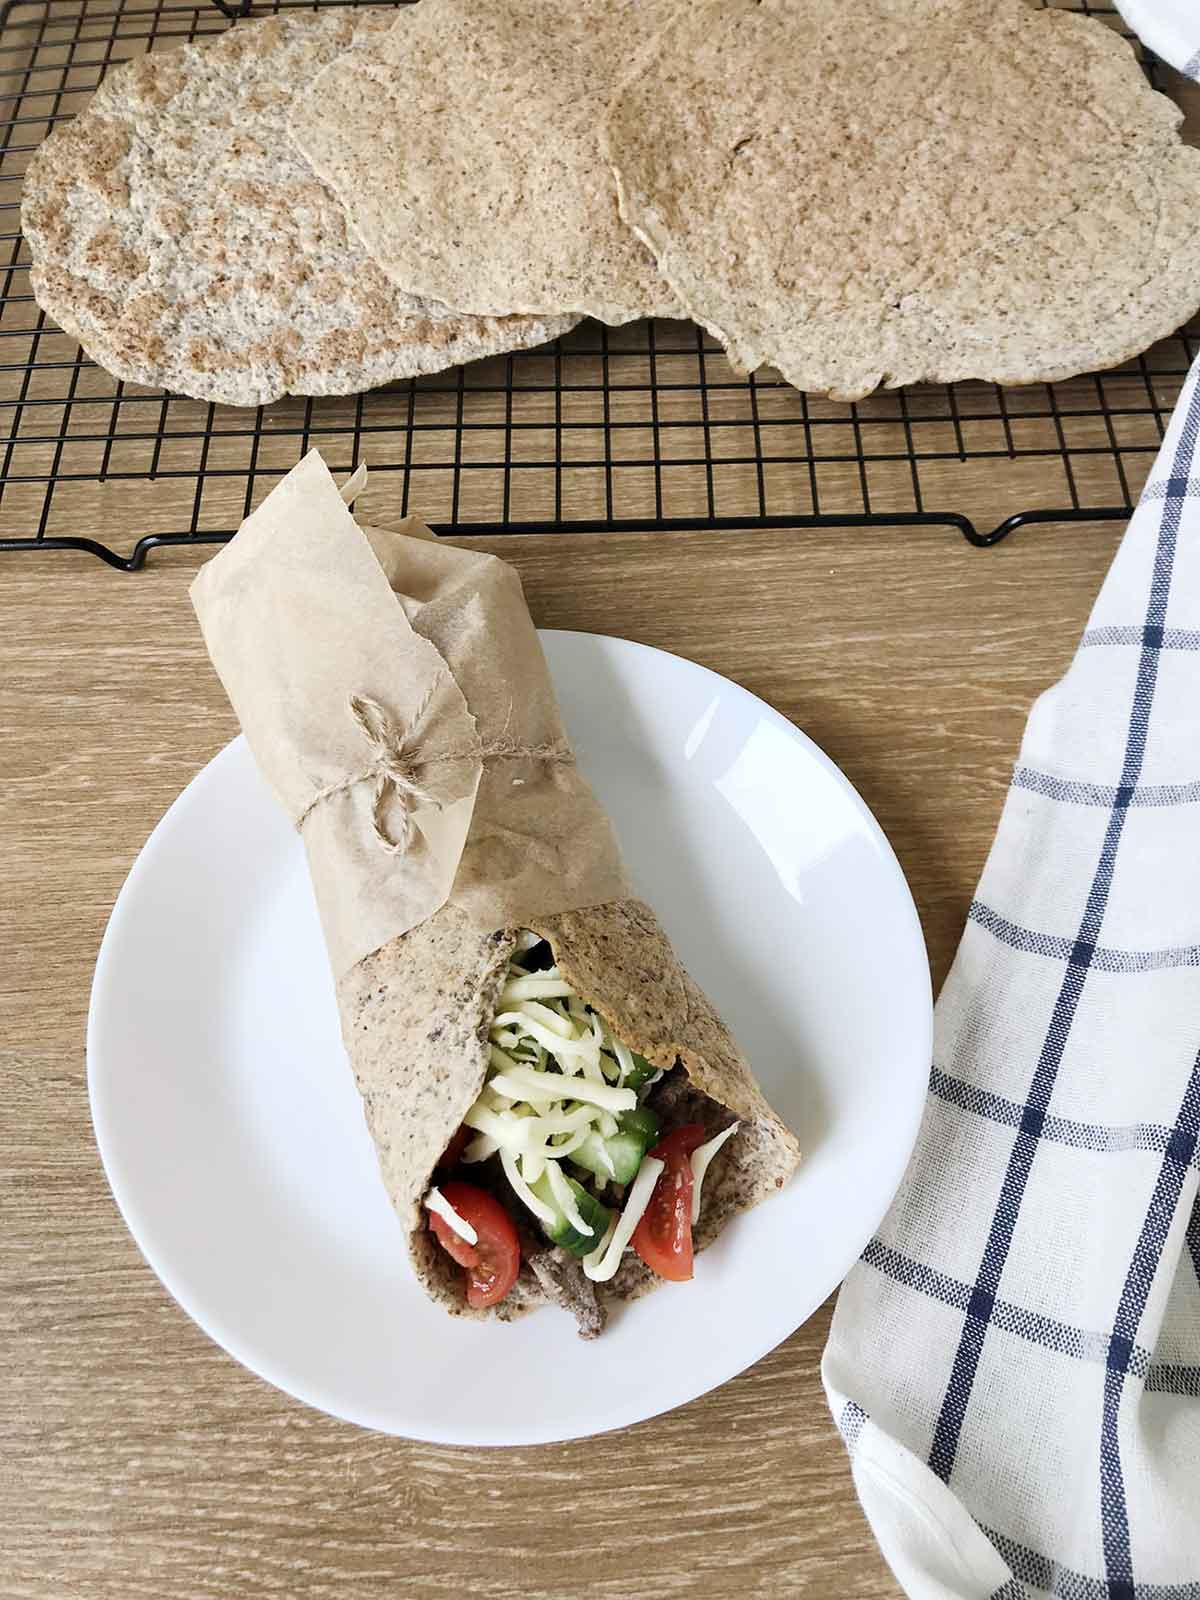 keto tortilla wrap full of tomatoes, cheese and beef.